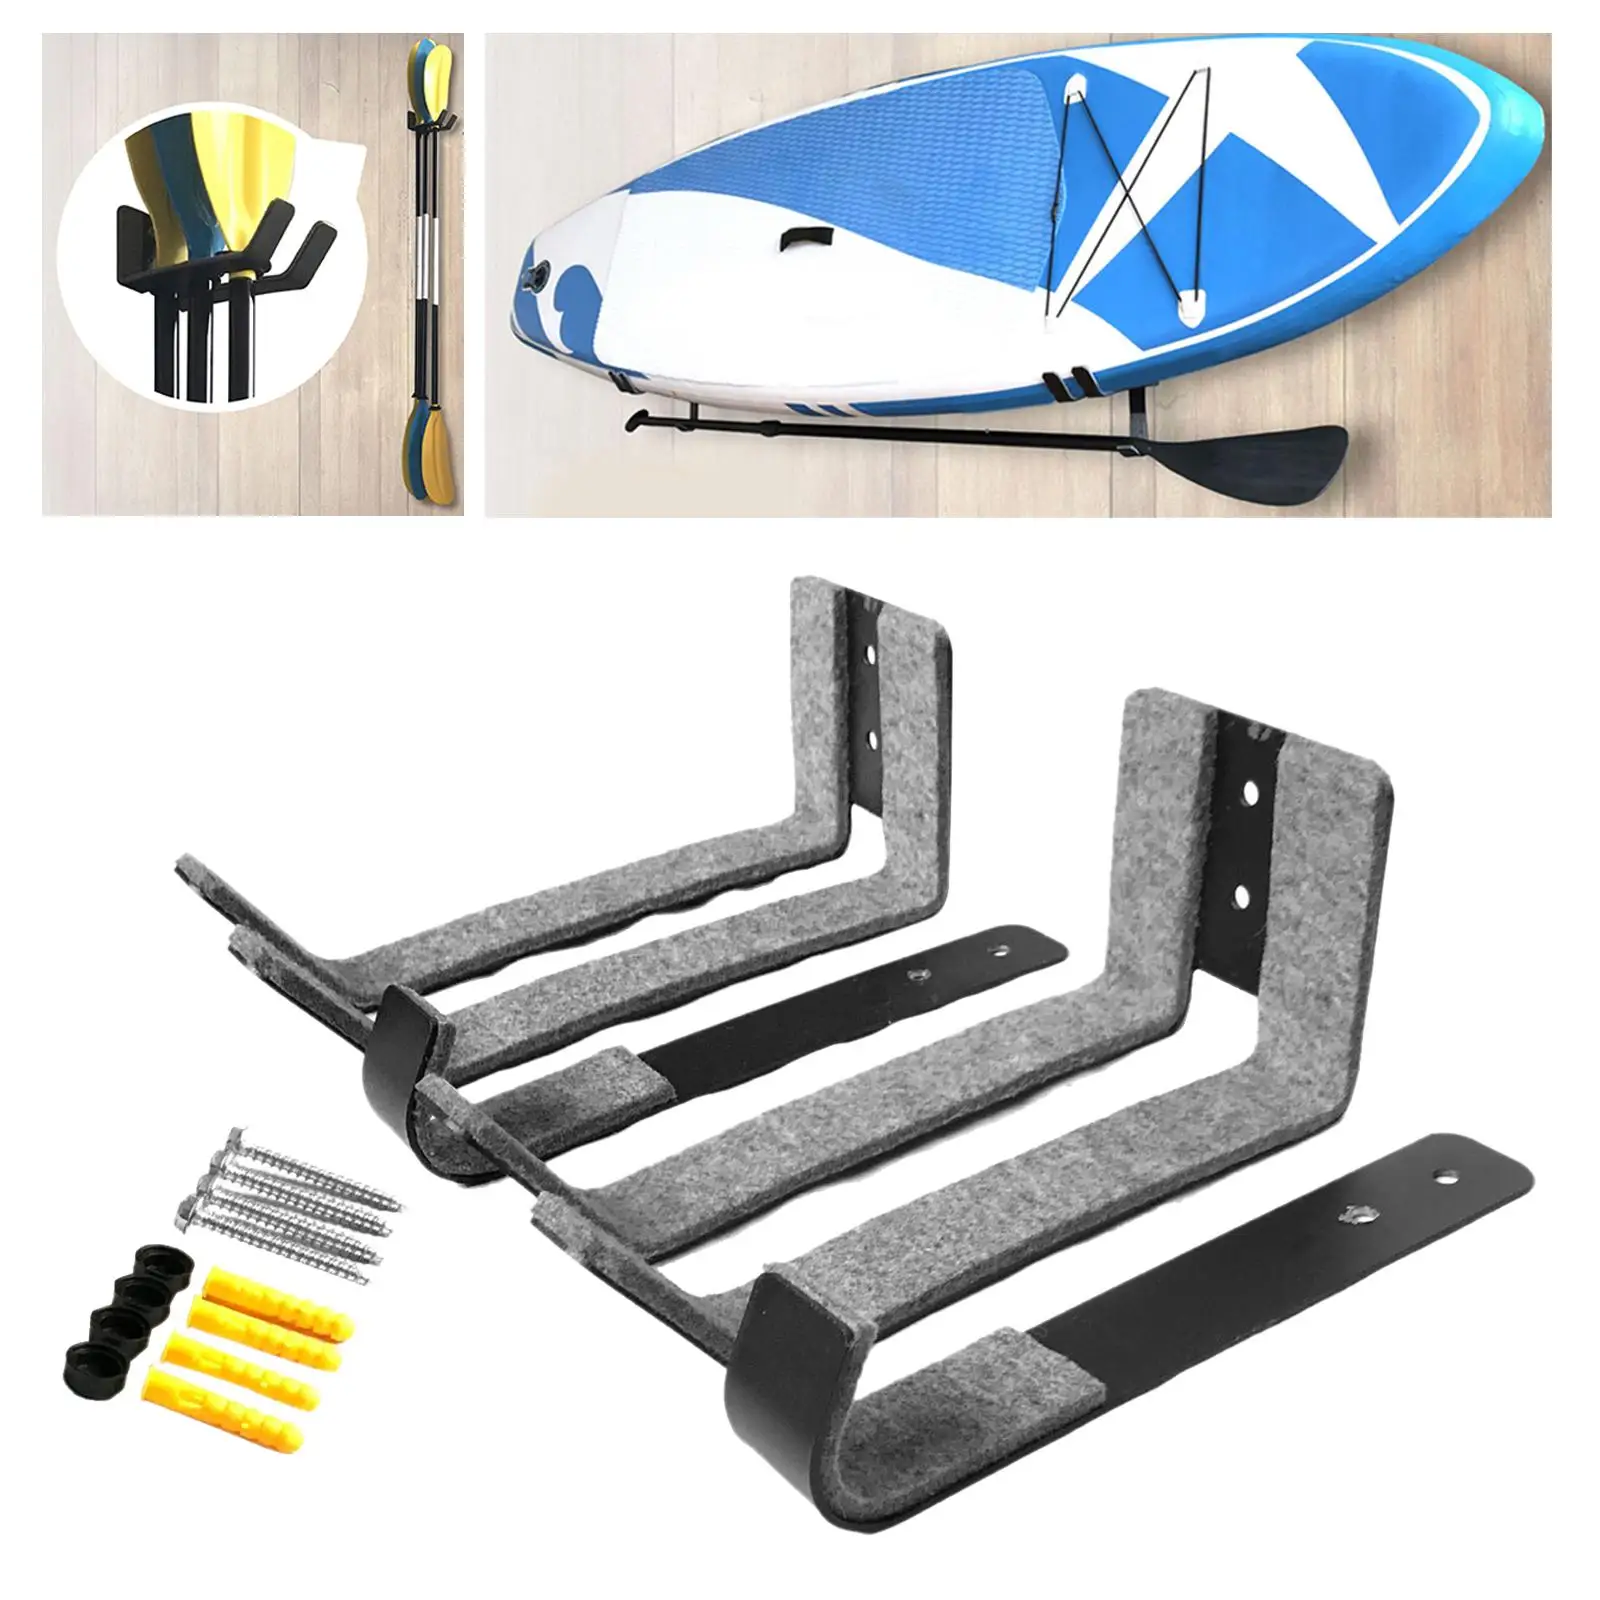 Metal Surf Board Rack Holds Both Long Boards and Short Boards with Foam